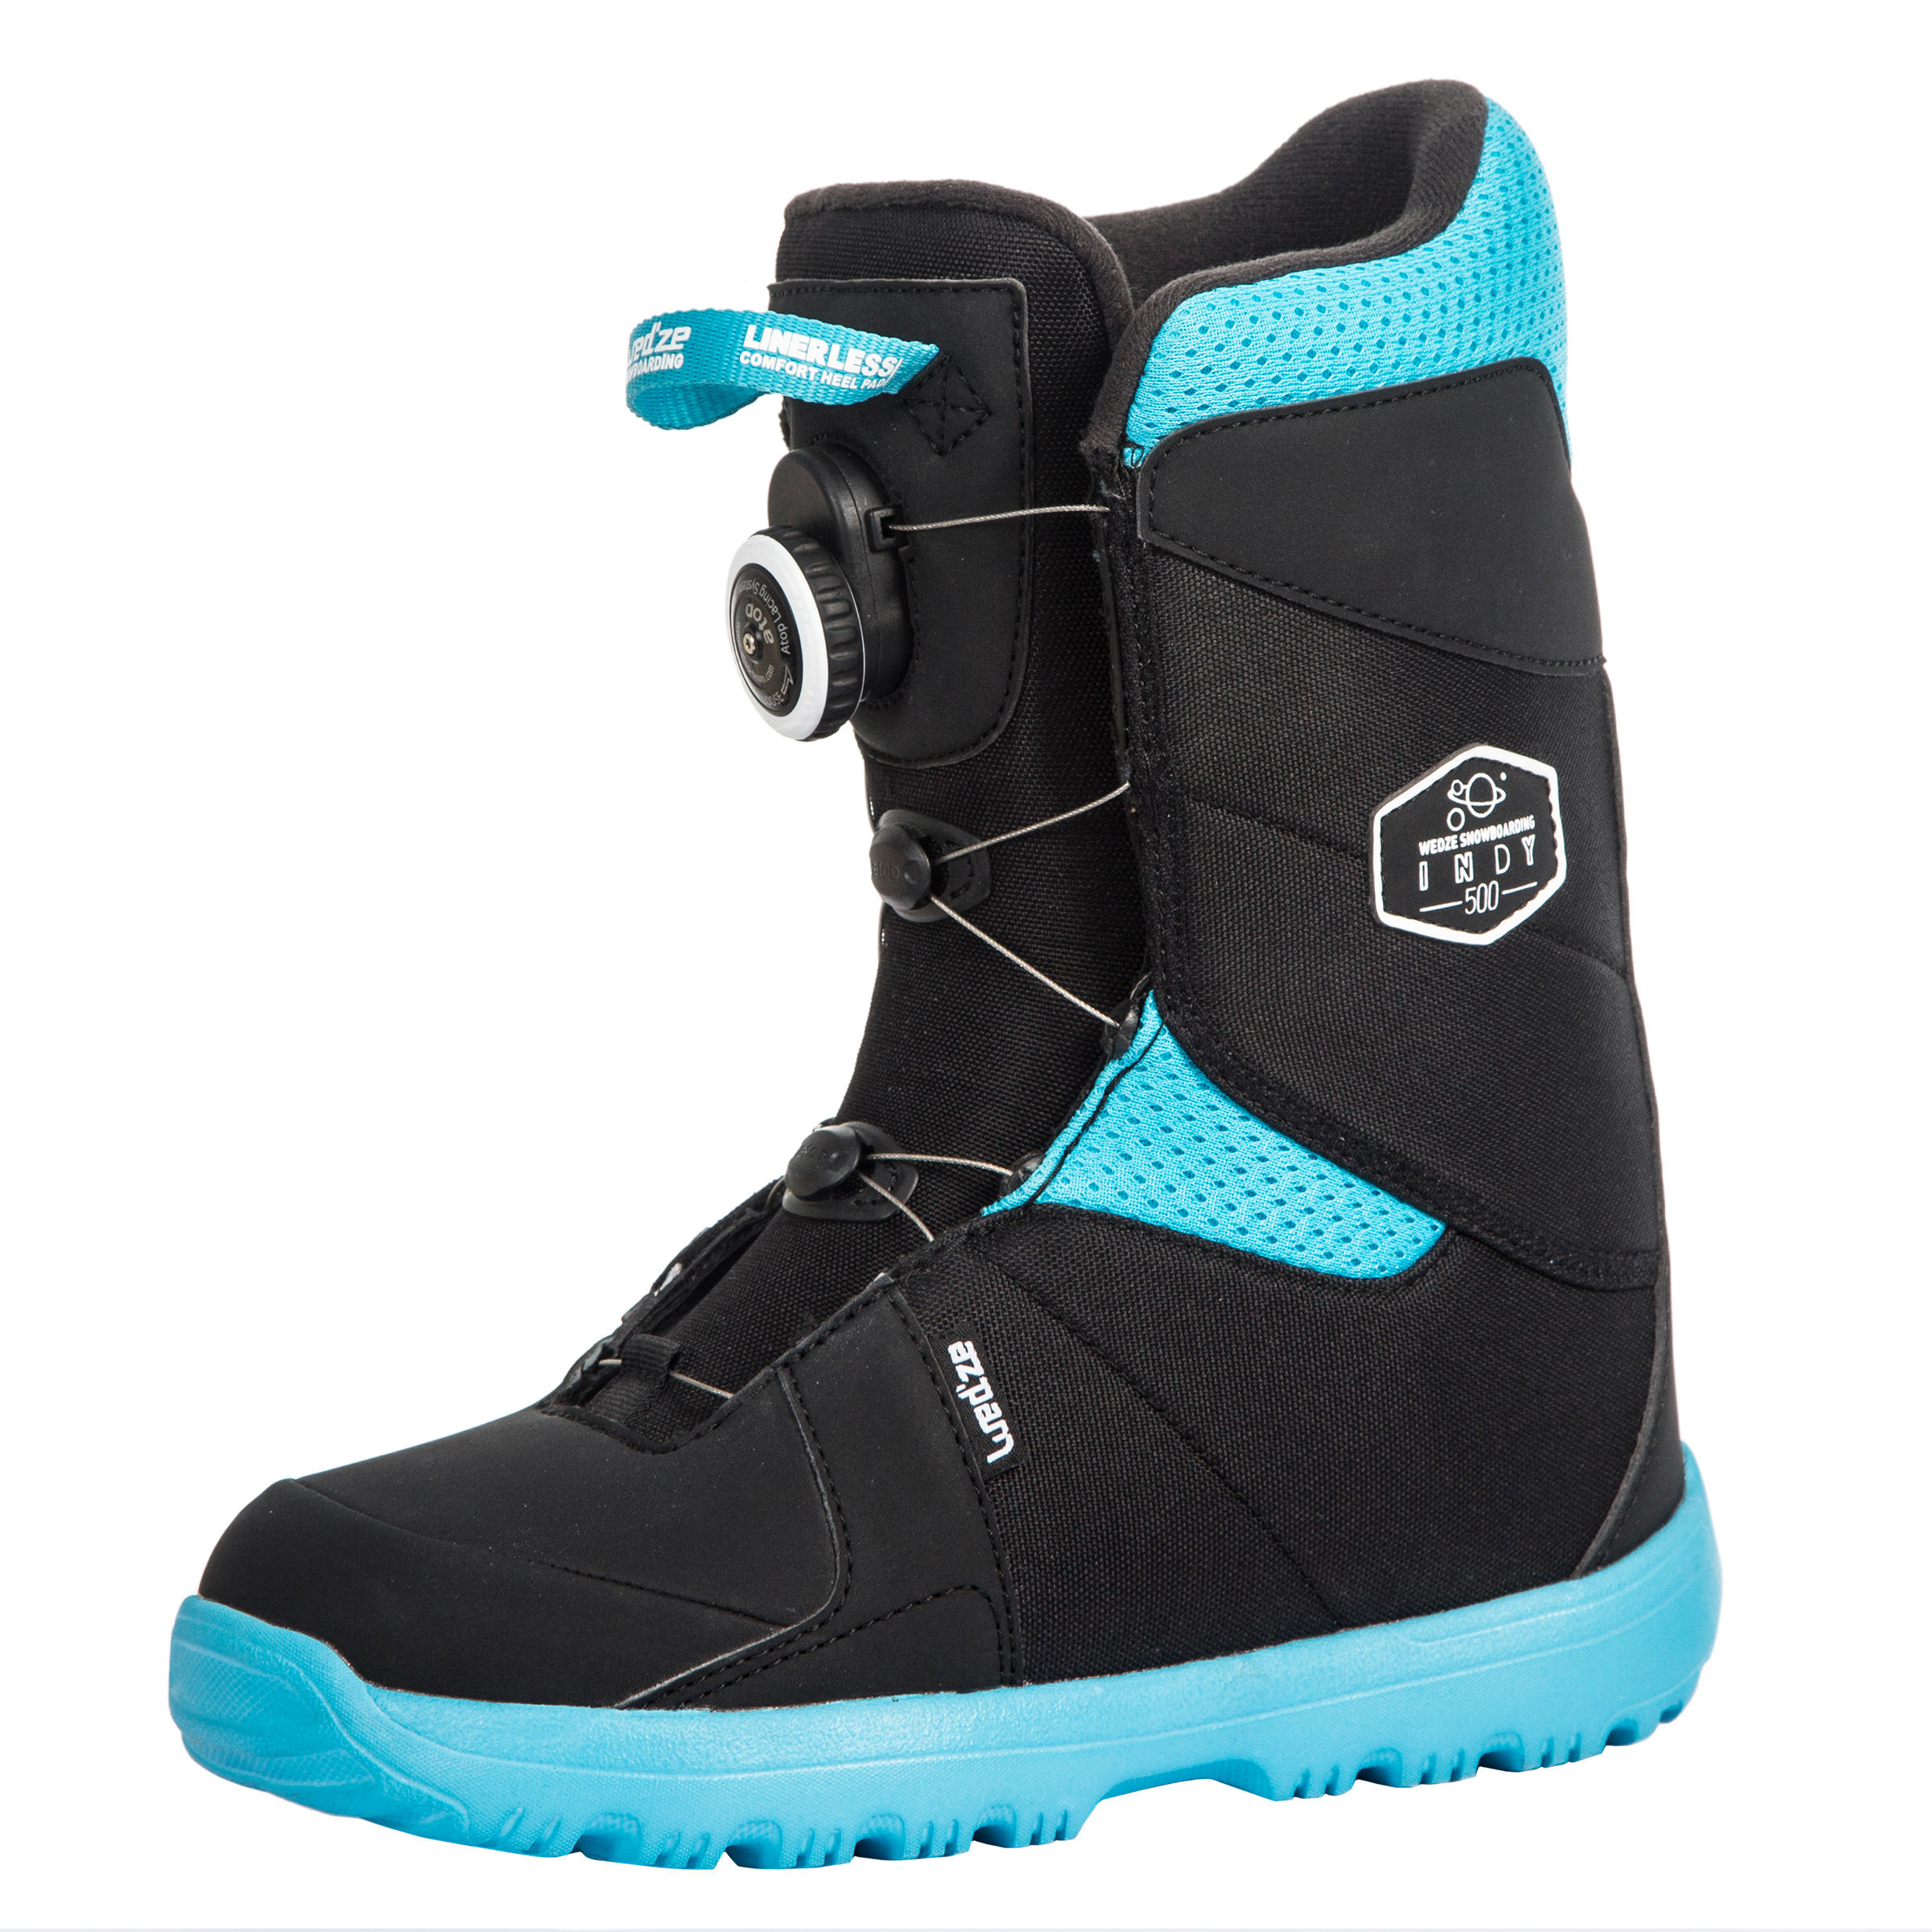 Boots snowboard all mountain/freestyle Indy 500 Copii decathlon.ro imagine noua